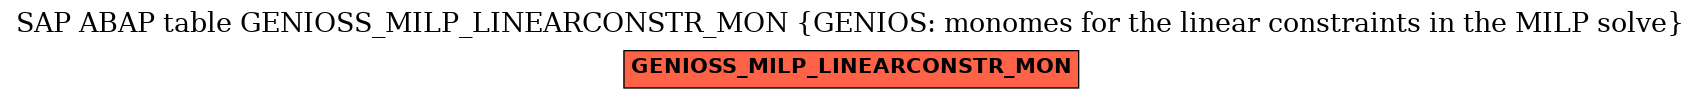 E-R Diagram for table GENIOSS_MILP_LINEARCONSTR_MON (GENIOS: monomes for the linear constraints in the MILP solve)